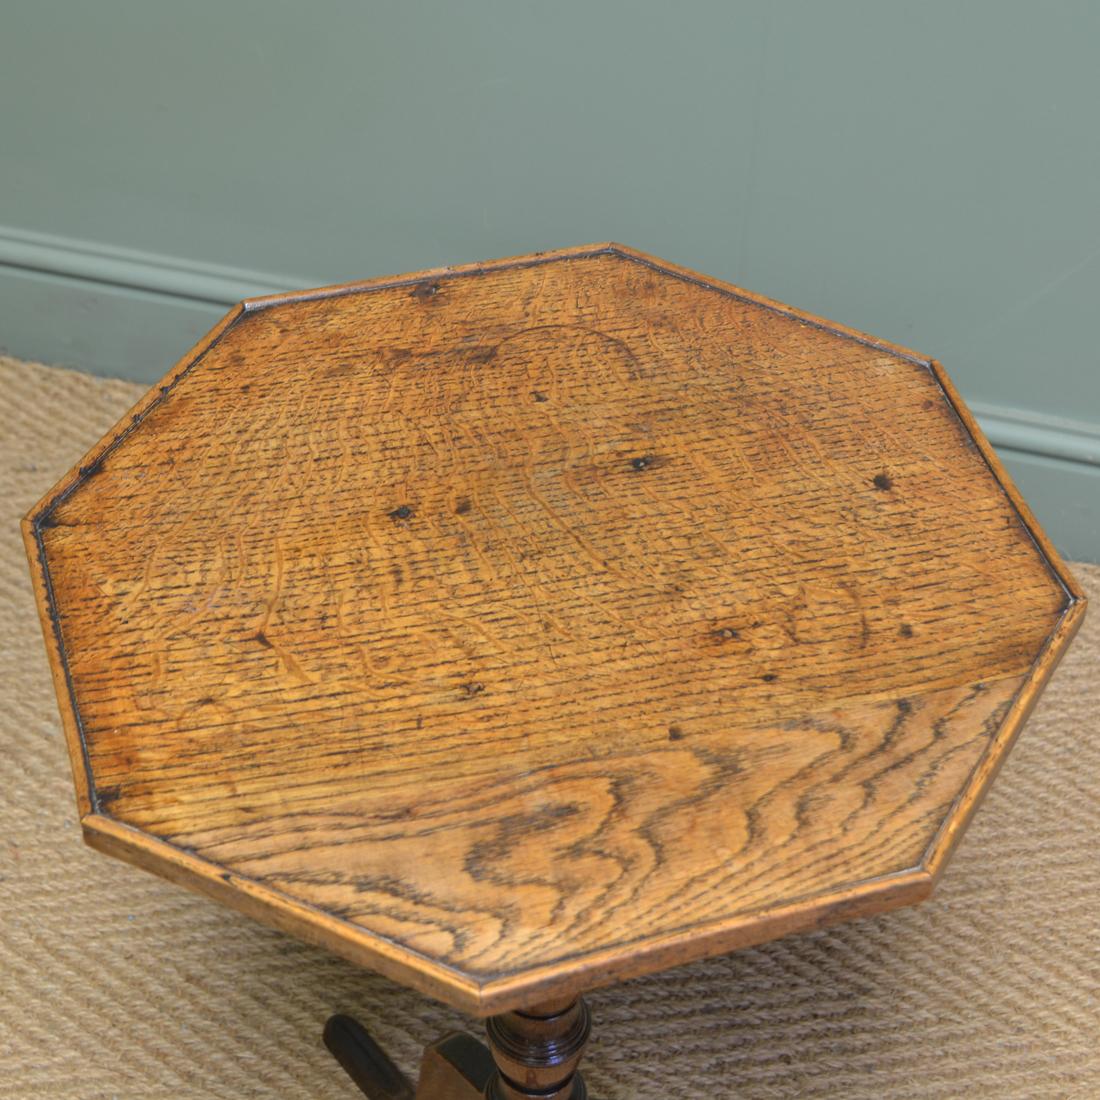 Beautifully figured Regency oak antique occasional table.

This beautifully figured Regency oak antique occasional table, circa 1830 is full of beautiful charm and character. With an octagonal figured top above an elegant central turned pedestal